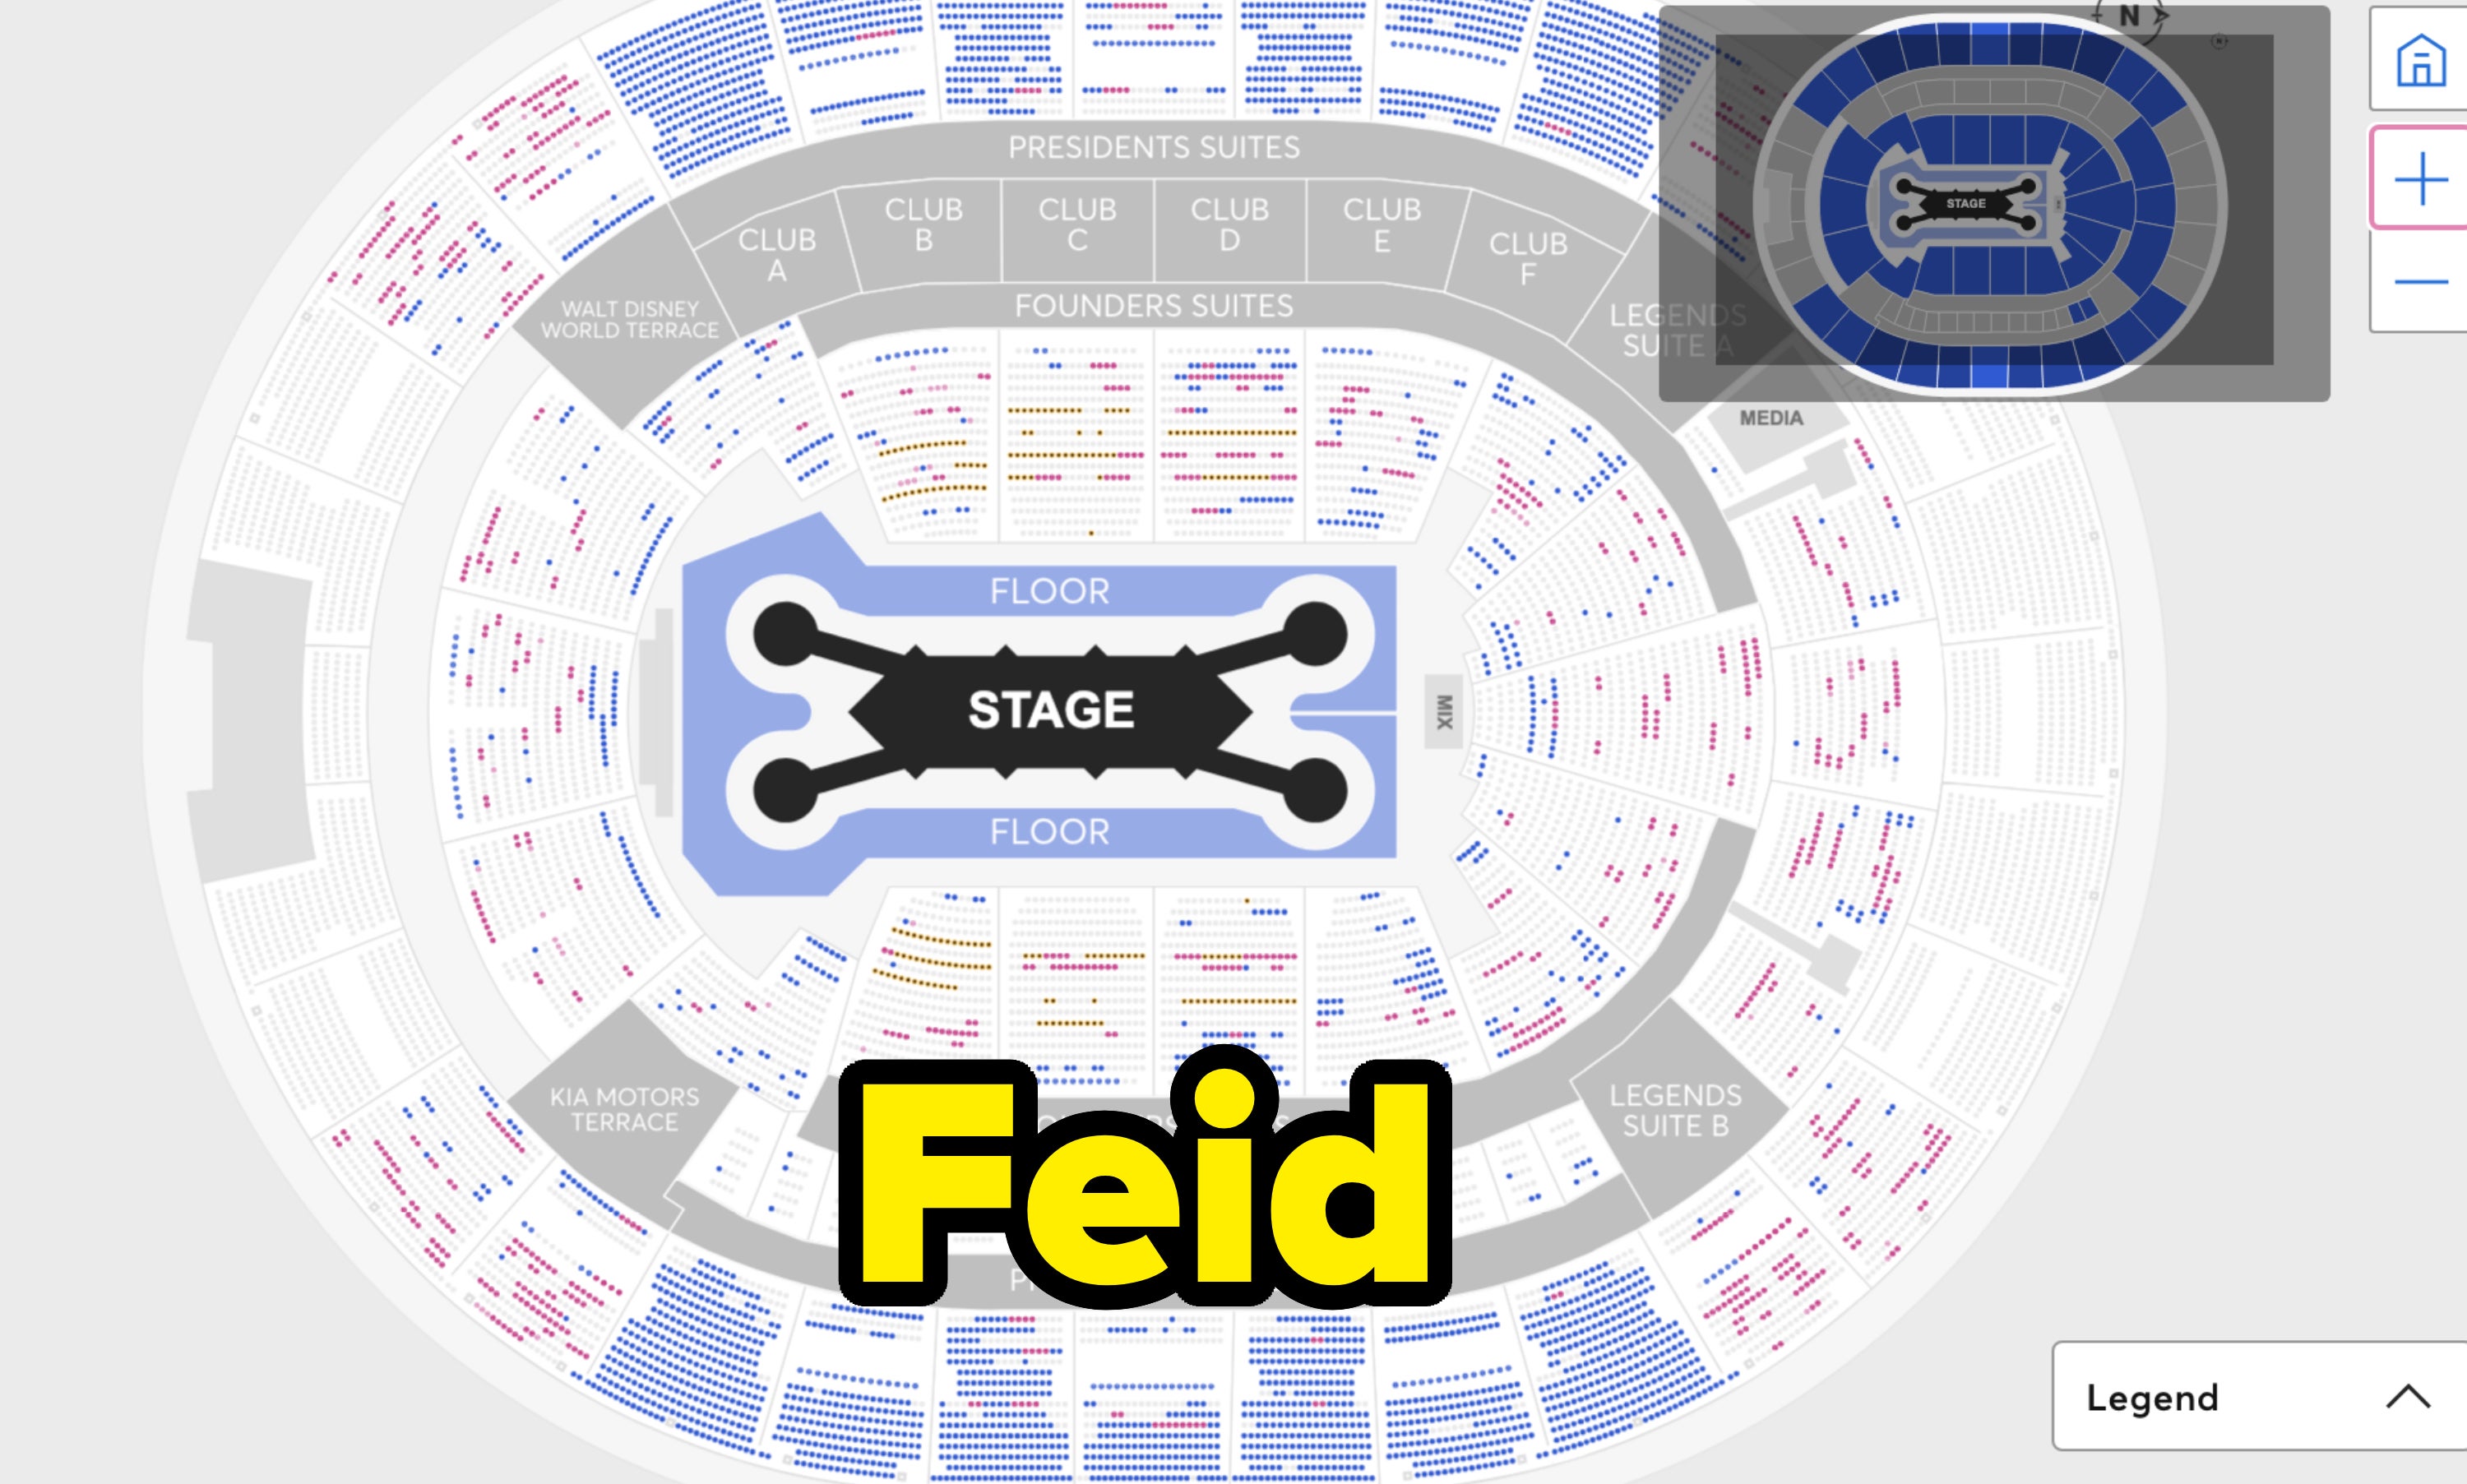 Seating chart with stage at center, surrounded by labeled sections including suites and clubs. Legend icon at bottom right